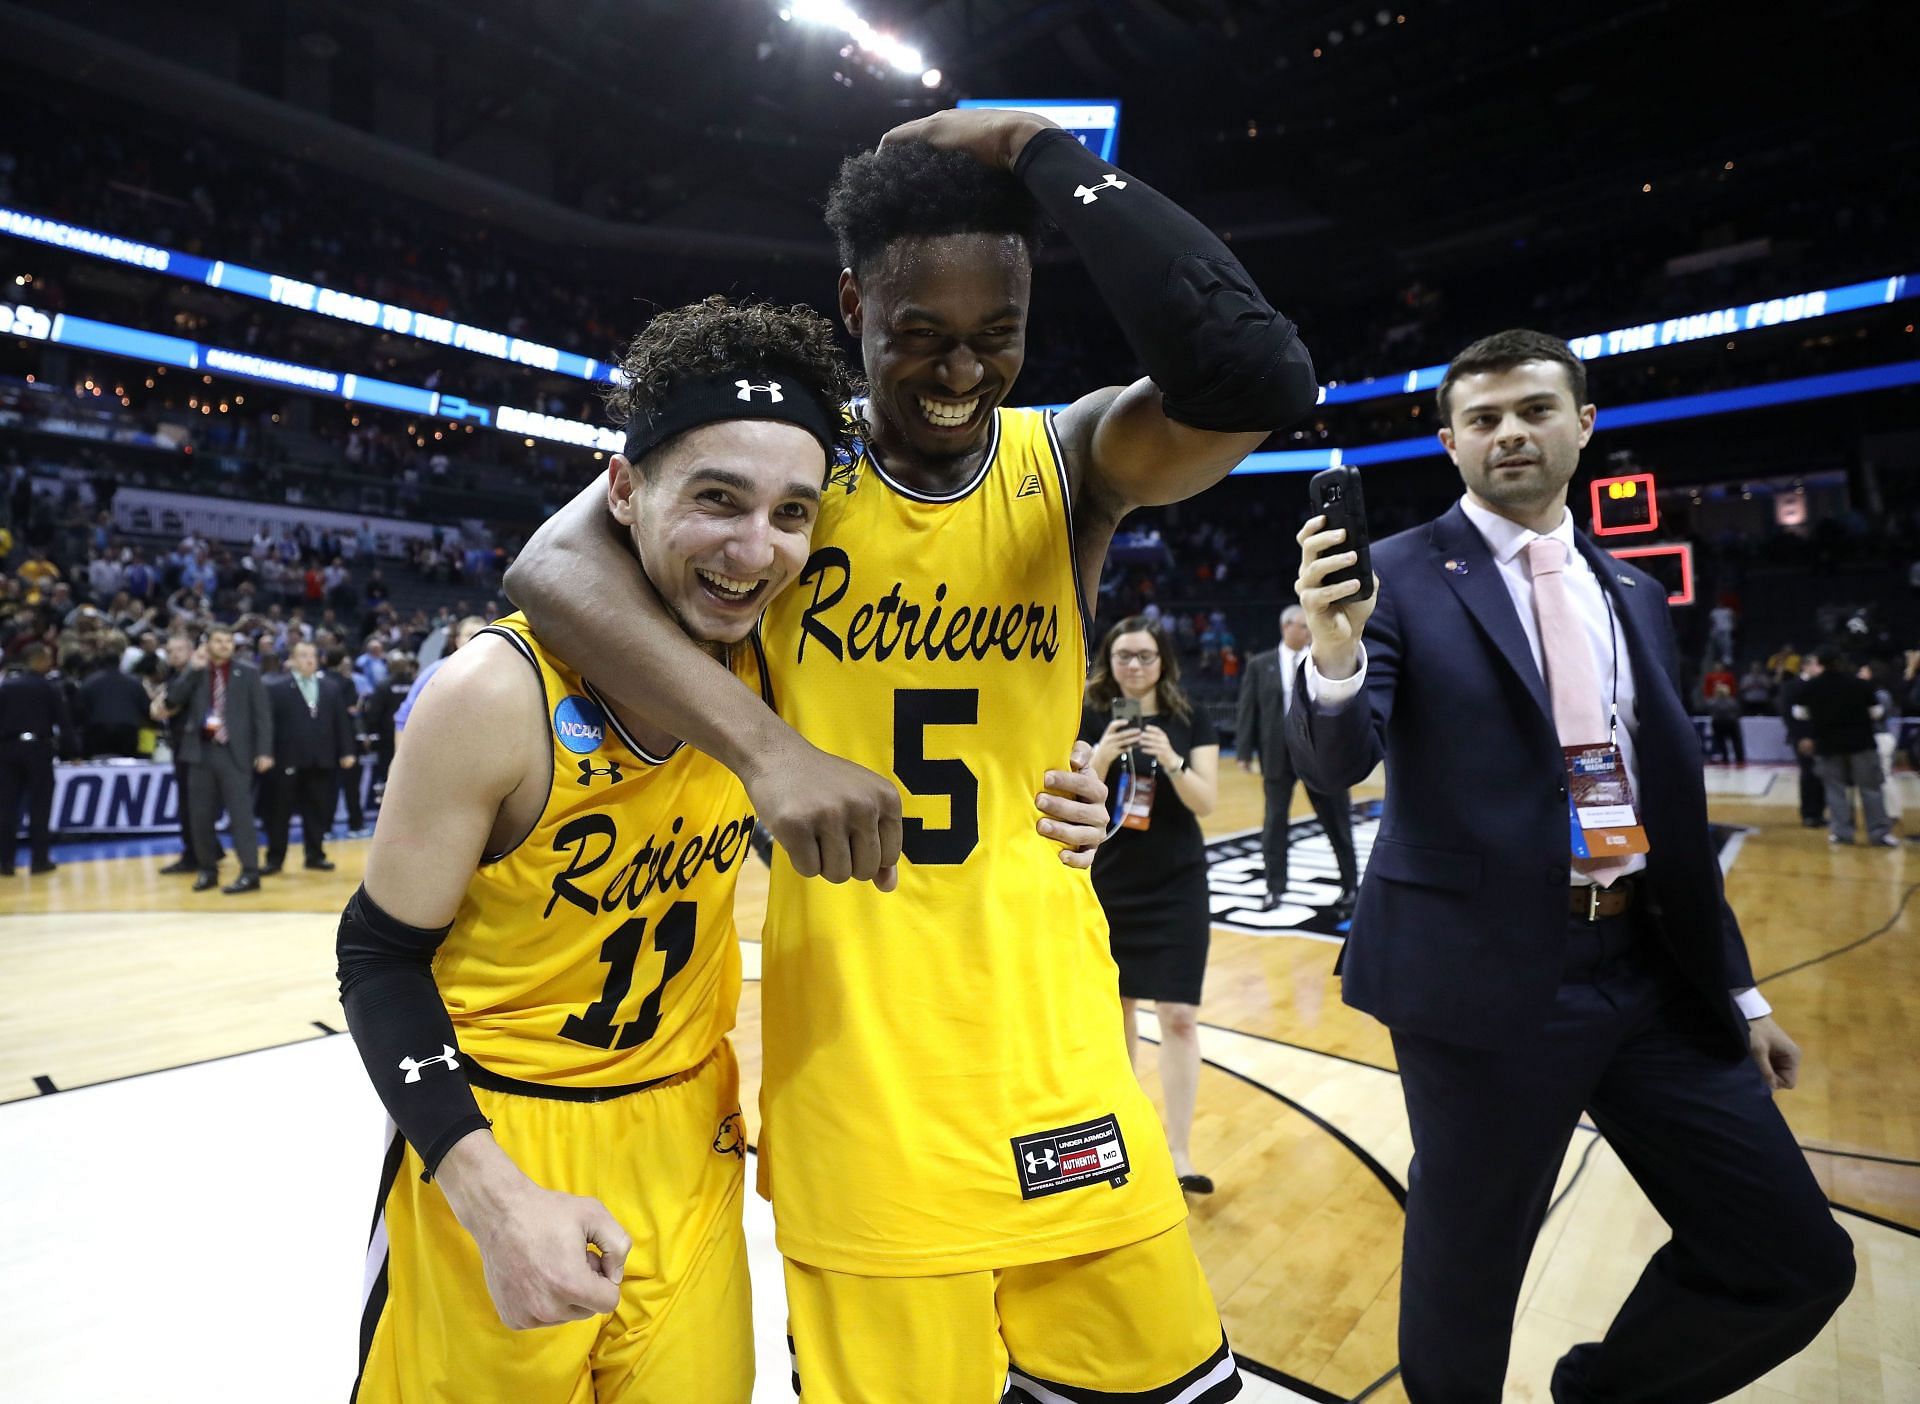 Even a 16 seed can pull off an upset if they shoot as well as UMBC when they beat No. 1 Virginia in 2018